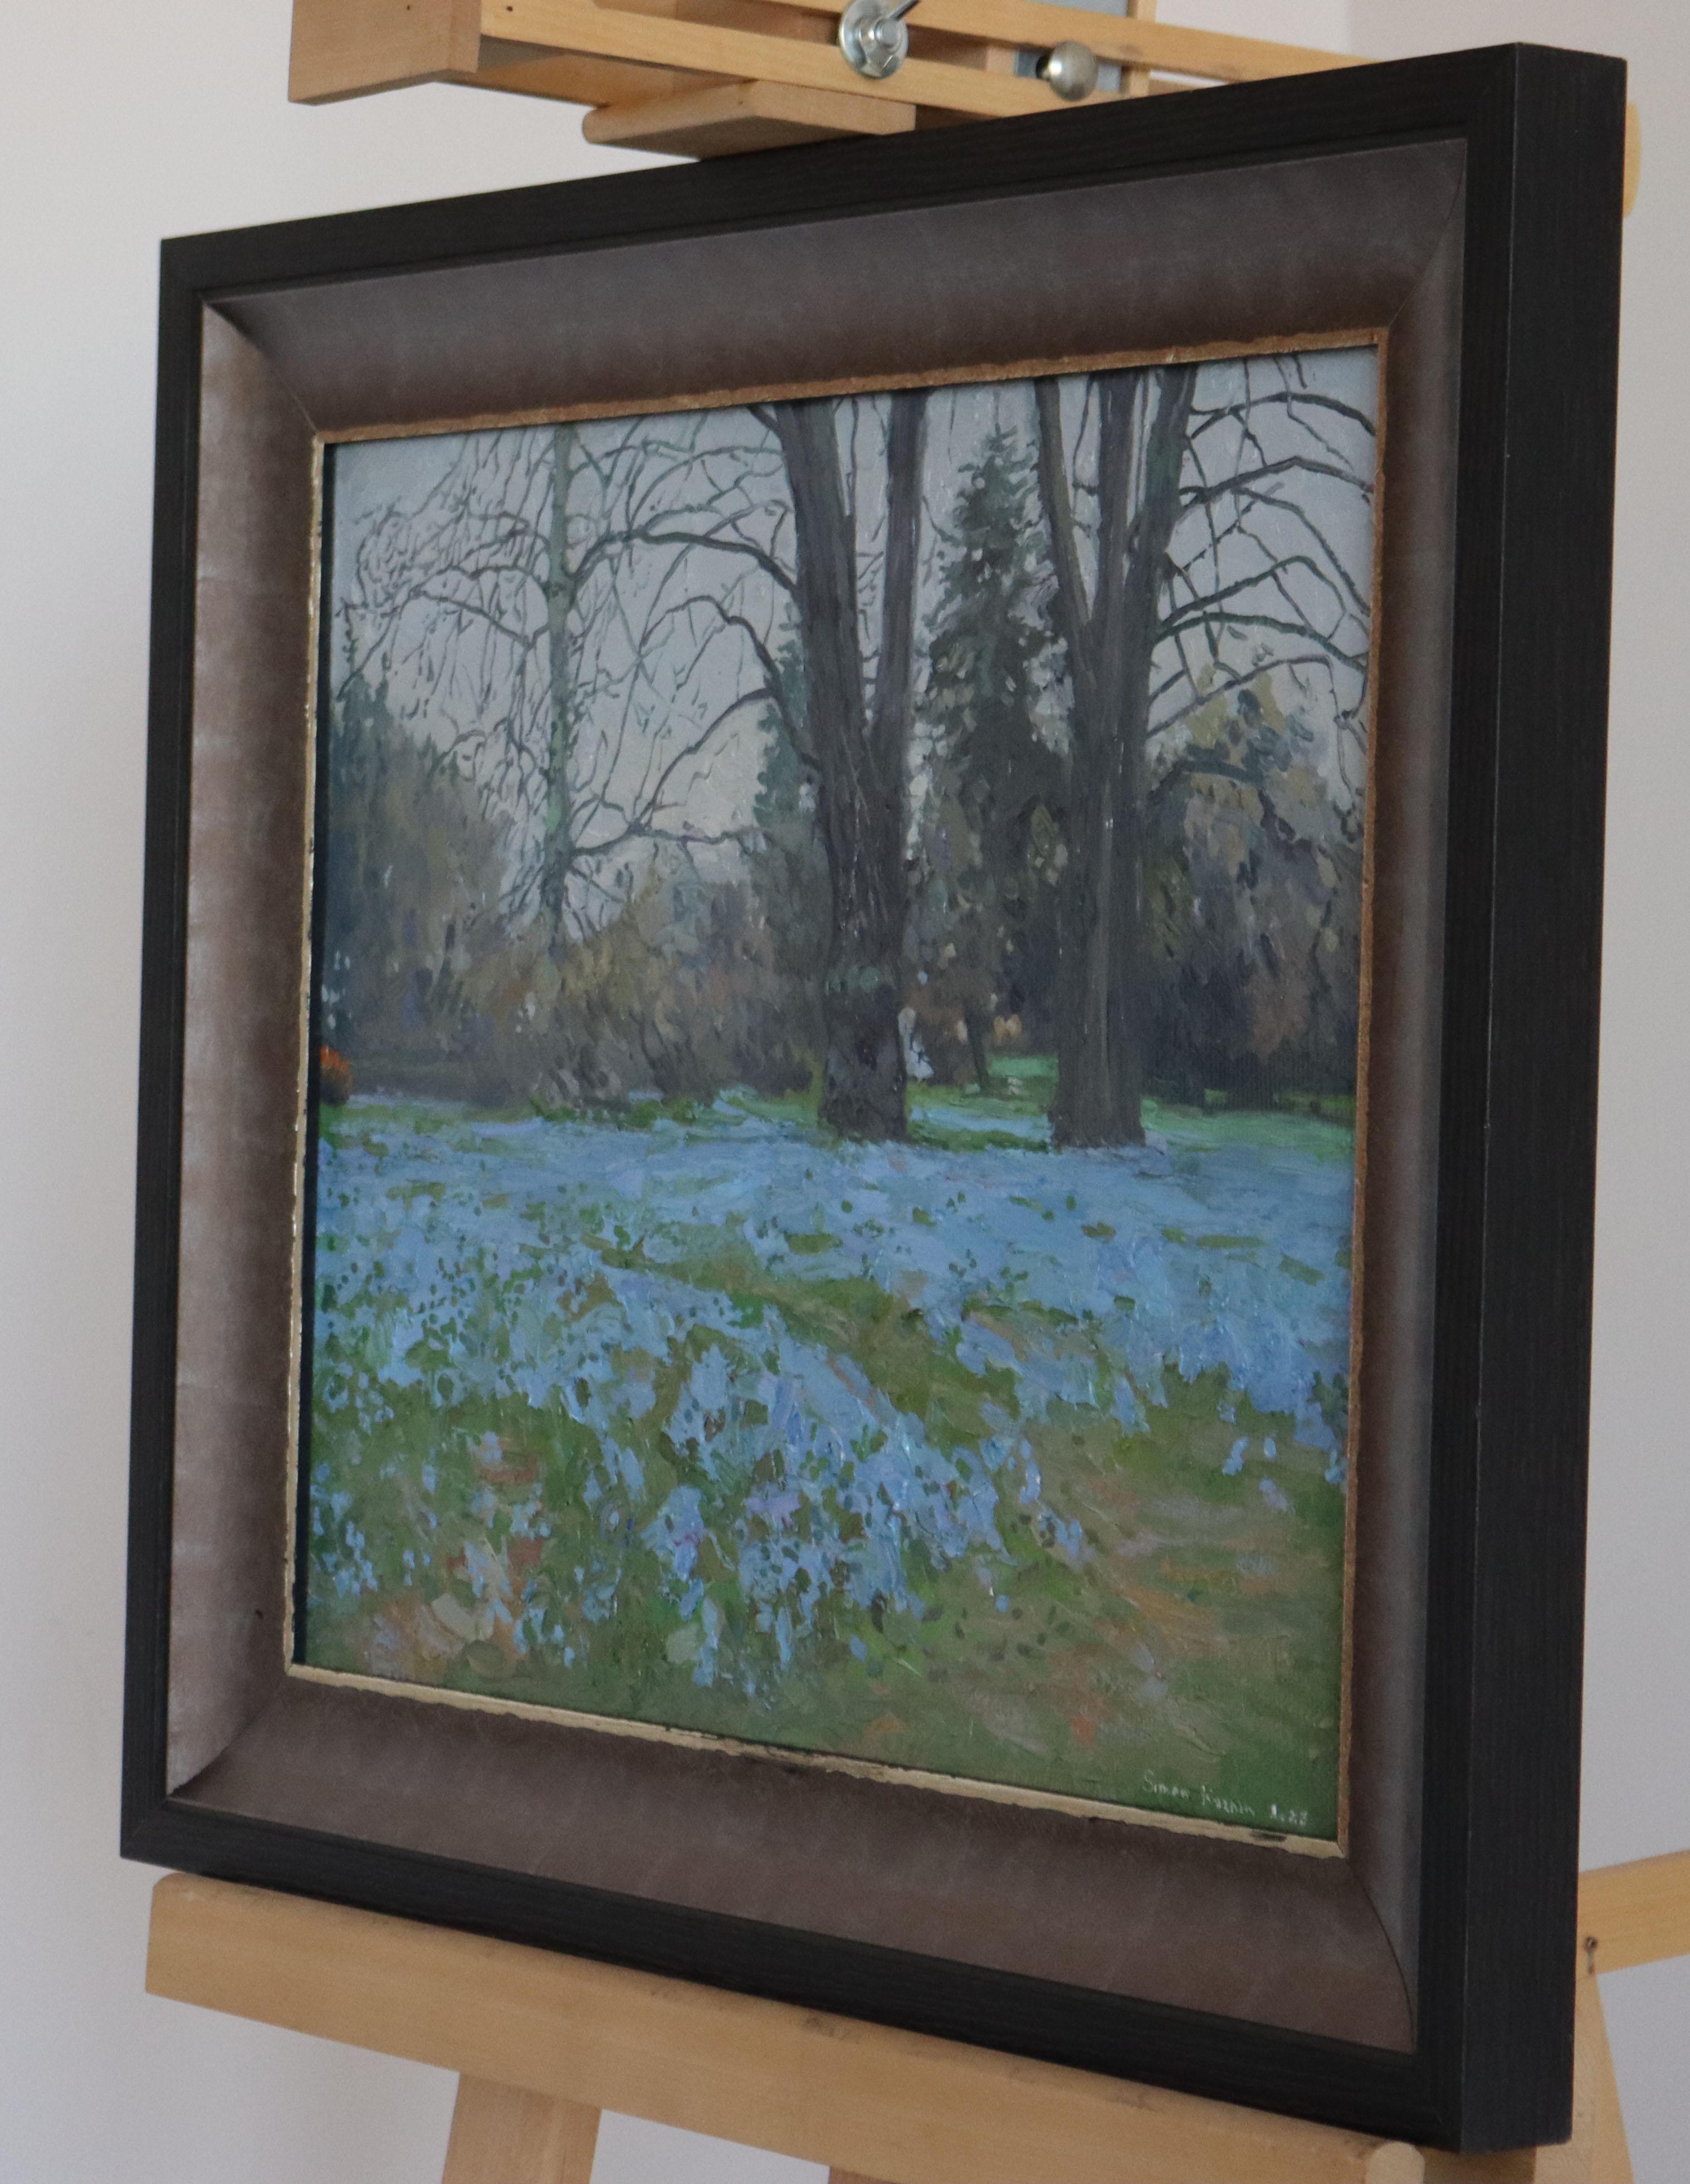 In this oil painting, I sought to capture the serene yet ephemeral transition from winter to spring. The brushwork, influenced by impressionism with a touch of realism, dances across the canvas, weaving a lush tapestry of awakening earth and